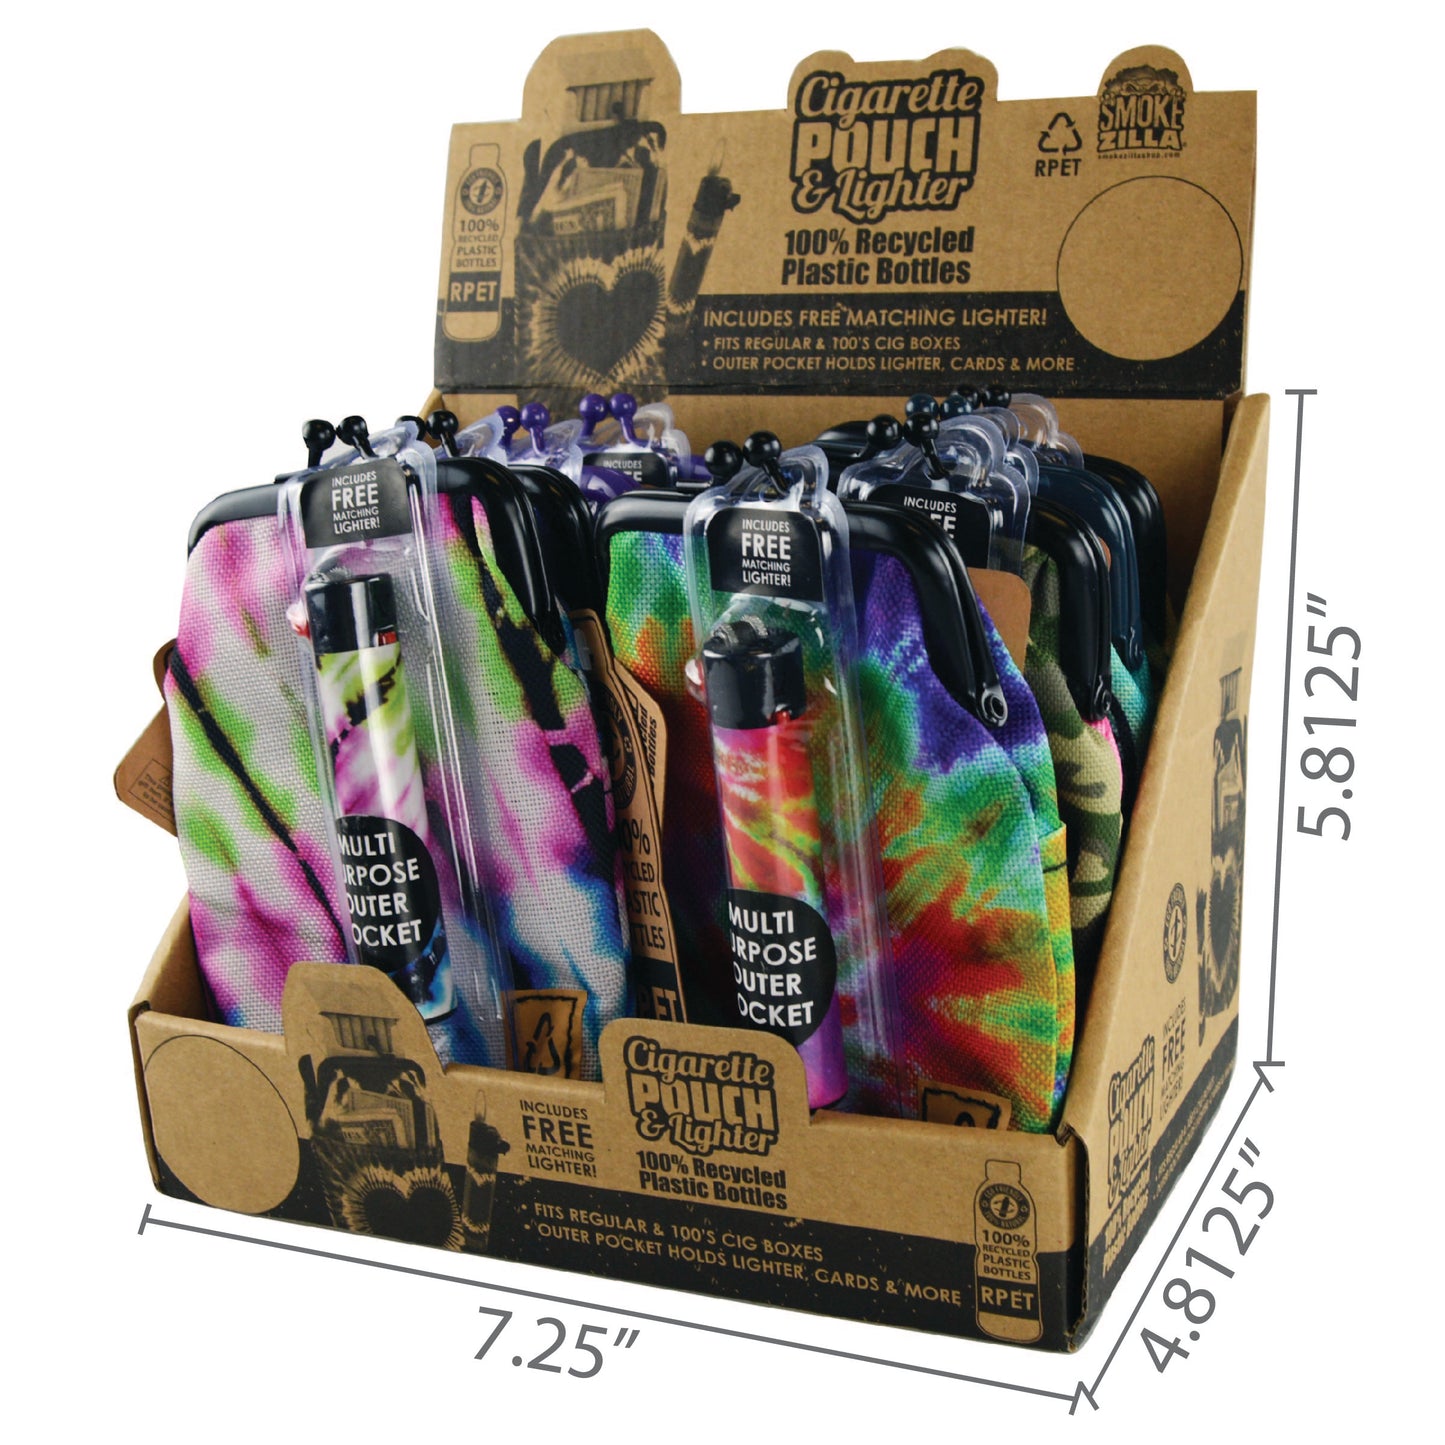 ITEM NUMBER 022059 PRINT CIG POUCH LIGHTER MIX C 8 PIECES PER DISPLAY